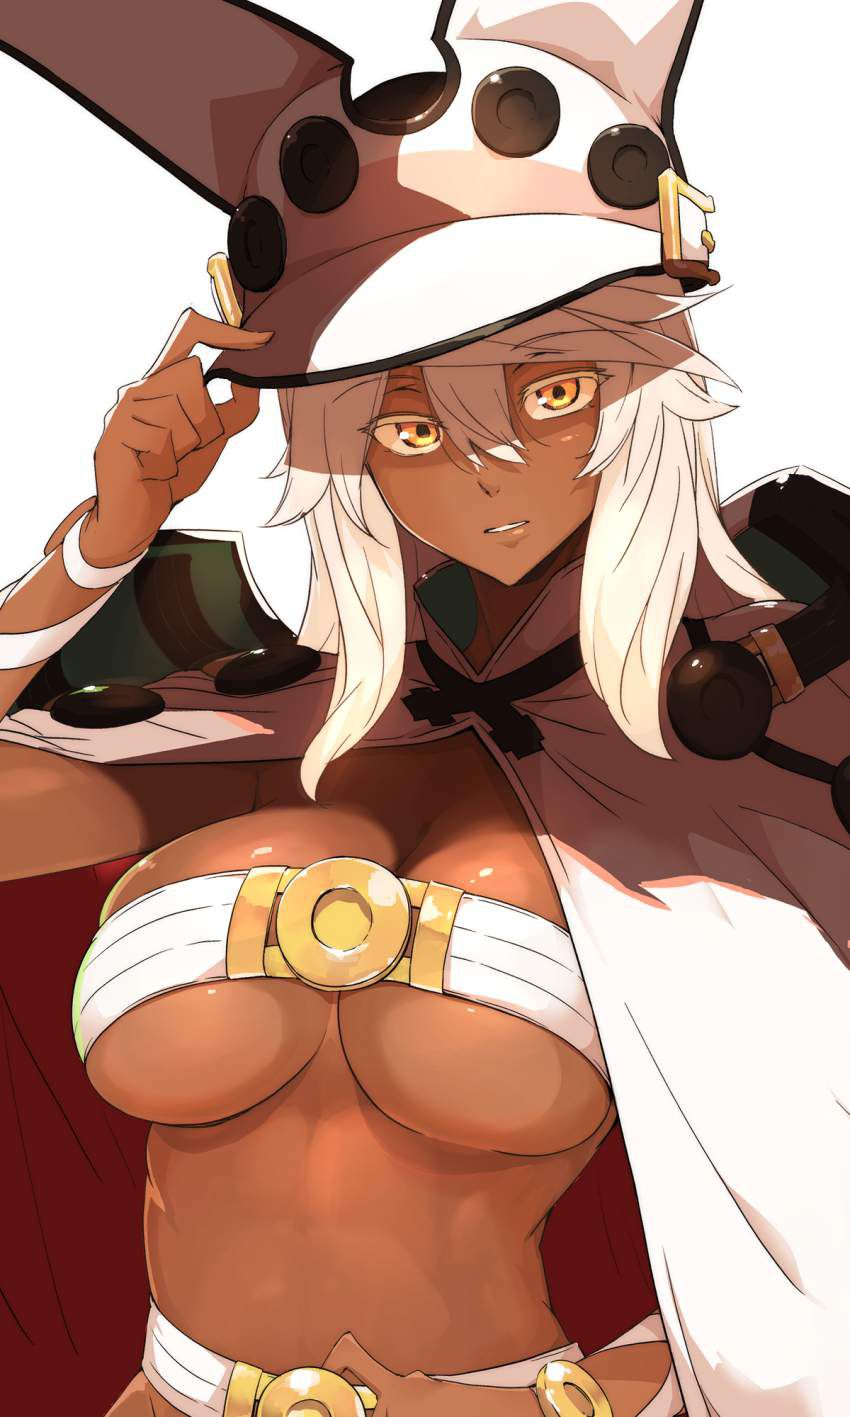 【Guilty Gear】Ram Rezzar = Valentine's Middle-Out Secondary Erotic Image Summary 9